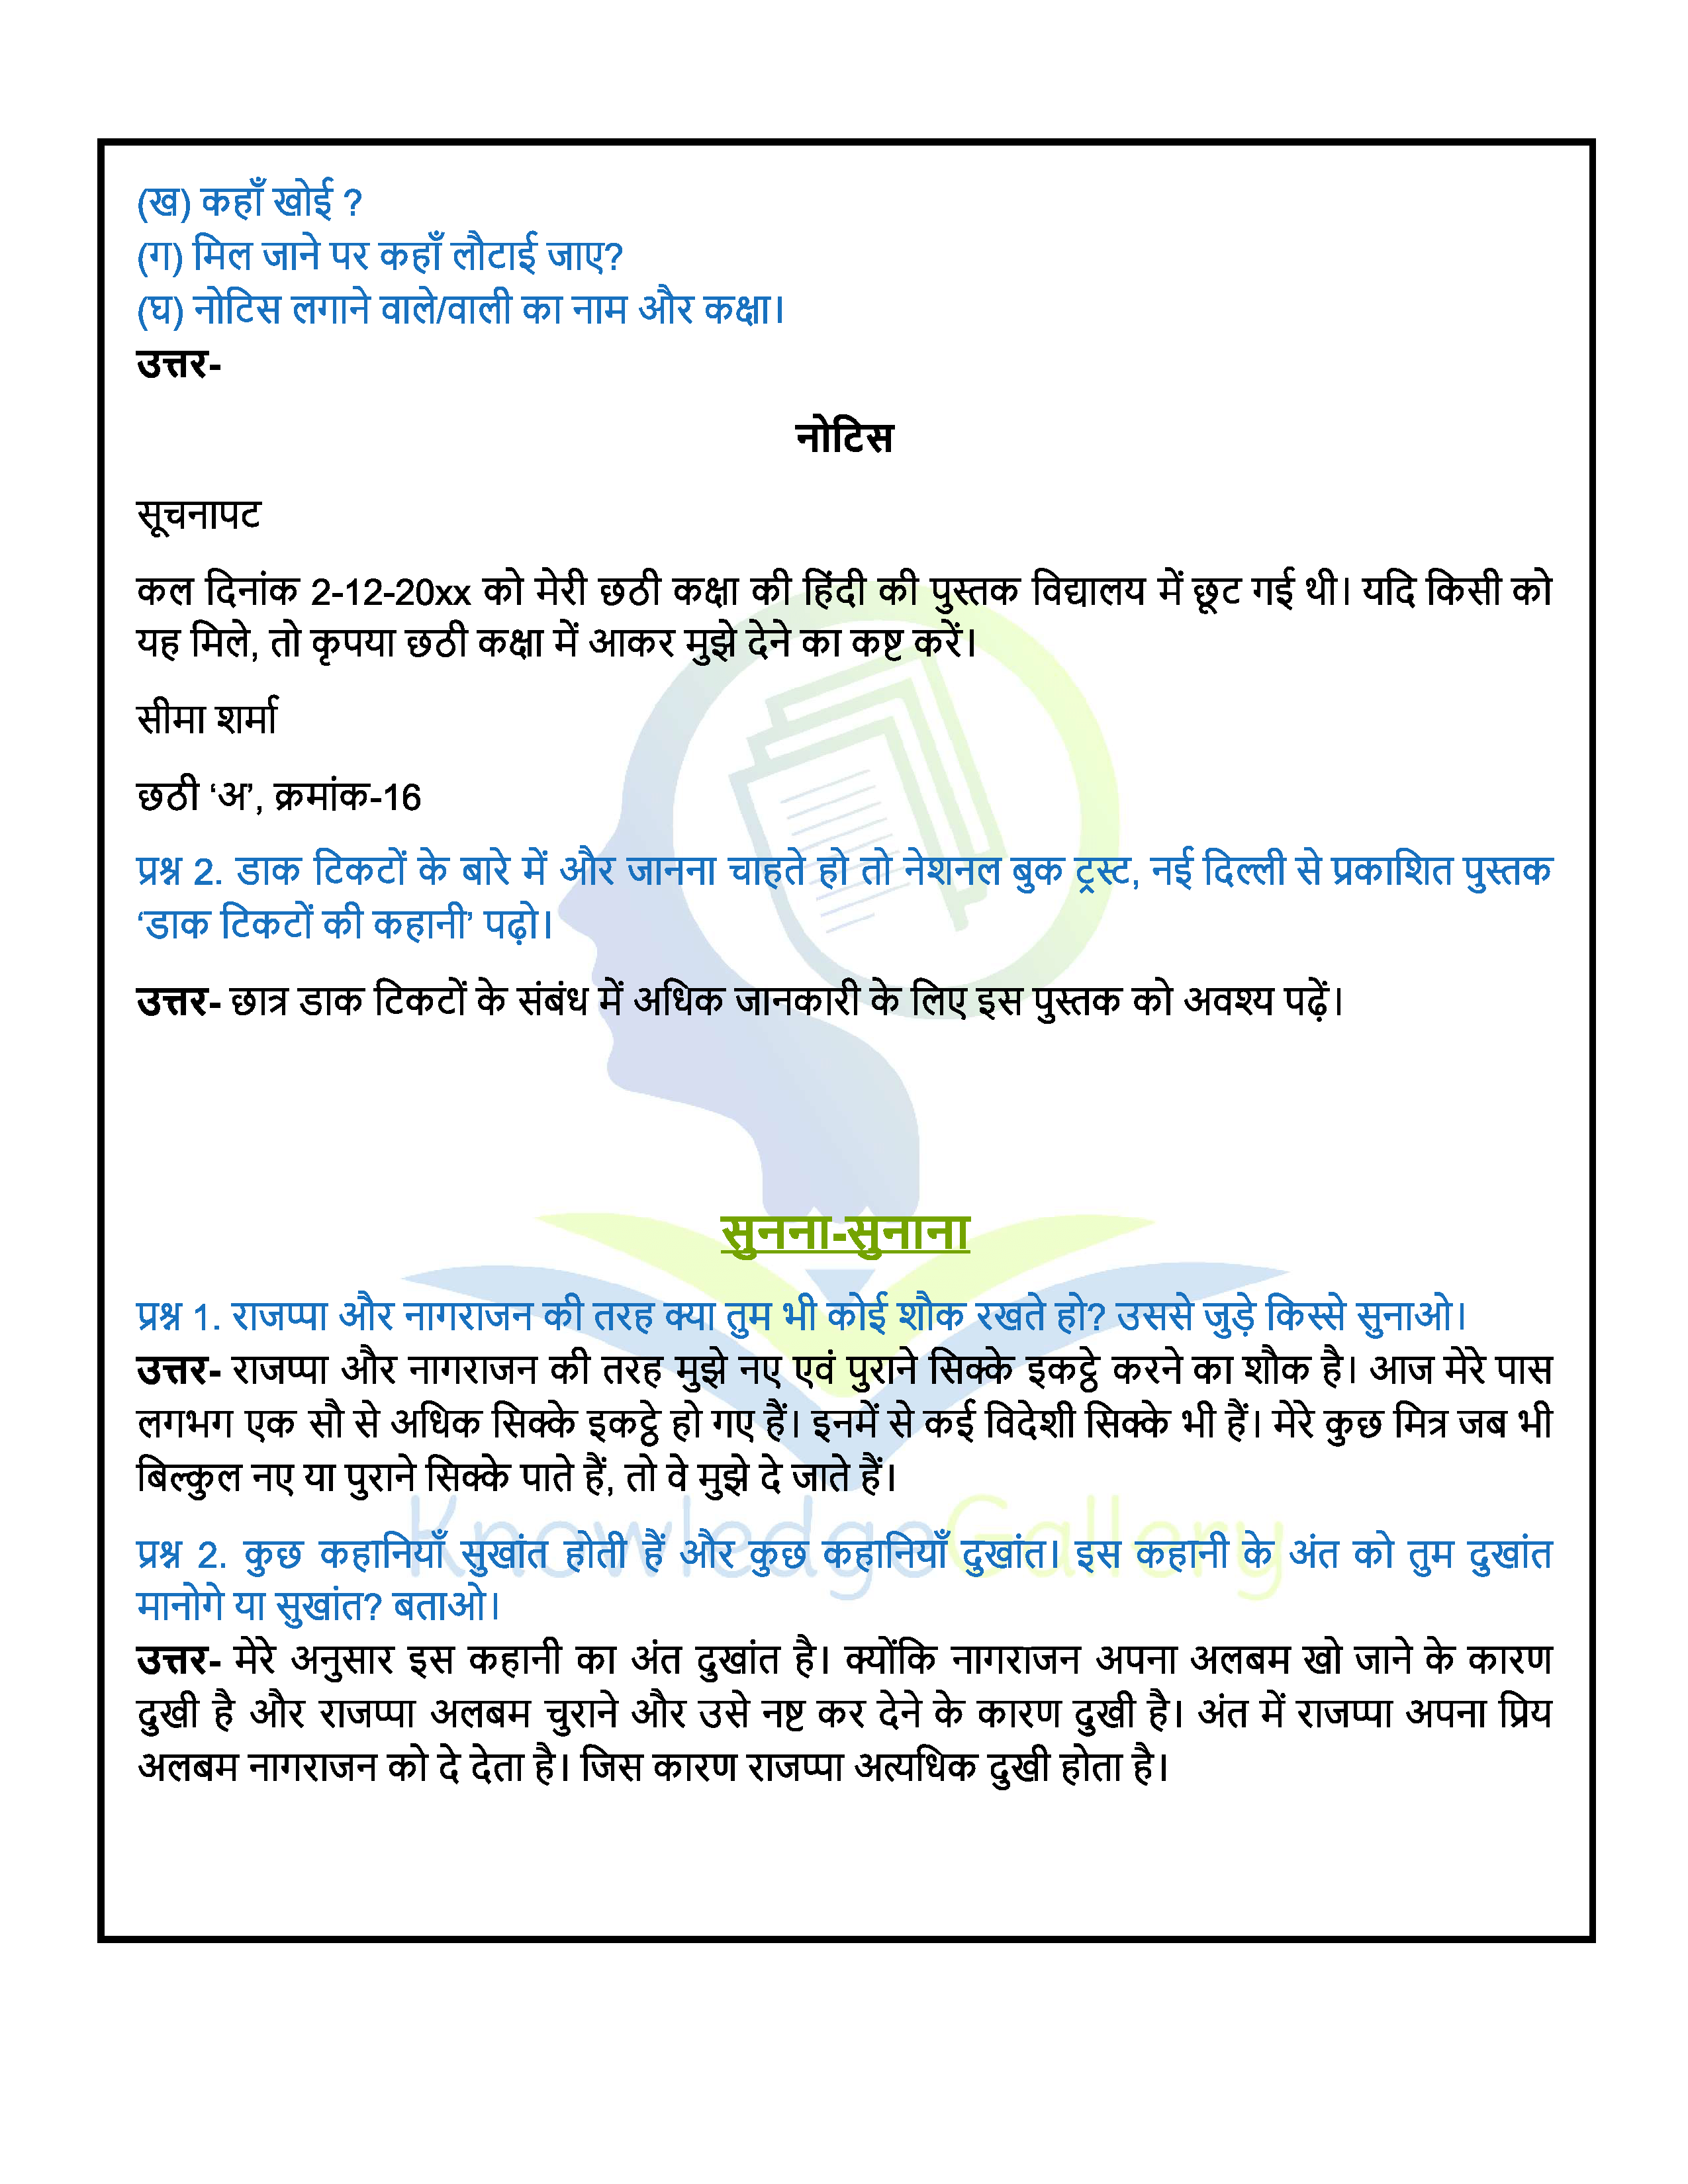 NCERT Solution For Class 6 Hindi Chapter 9 part 5